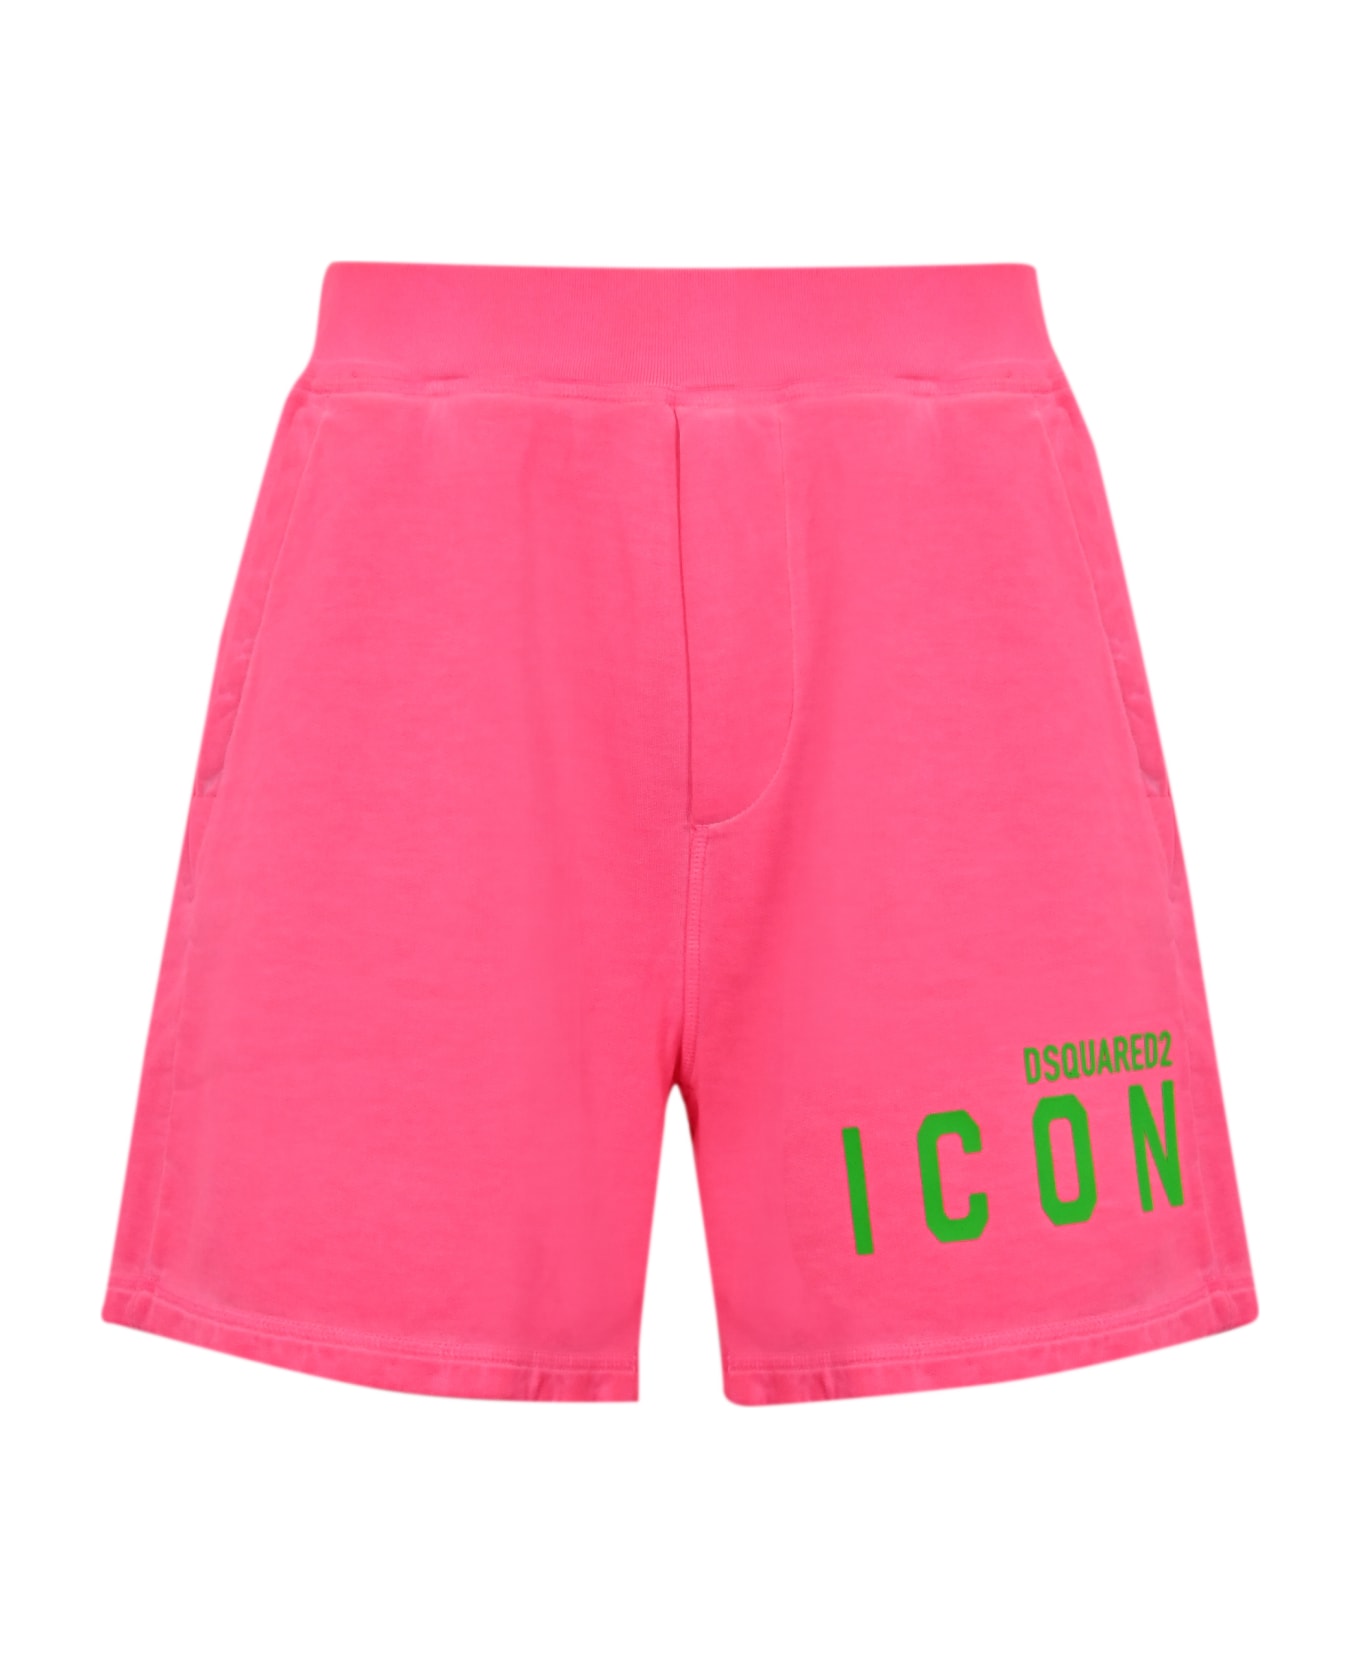 Dsquared2 Icon Cotton Shorts - Pink